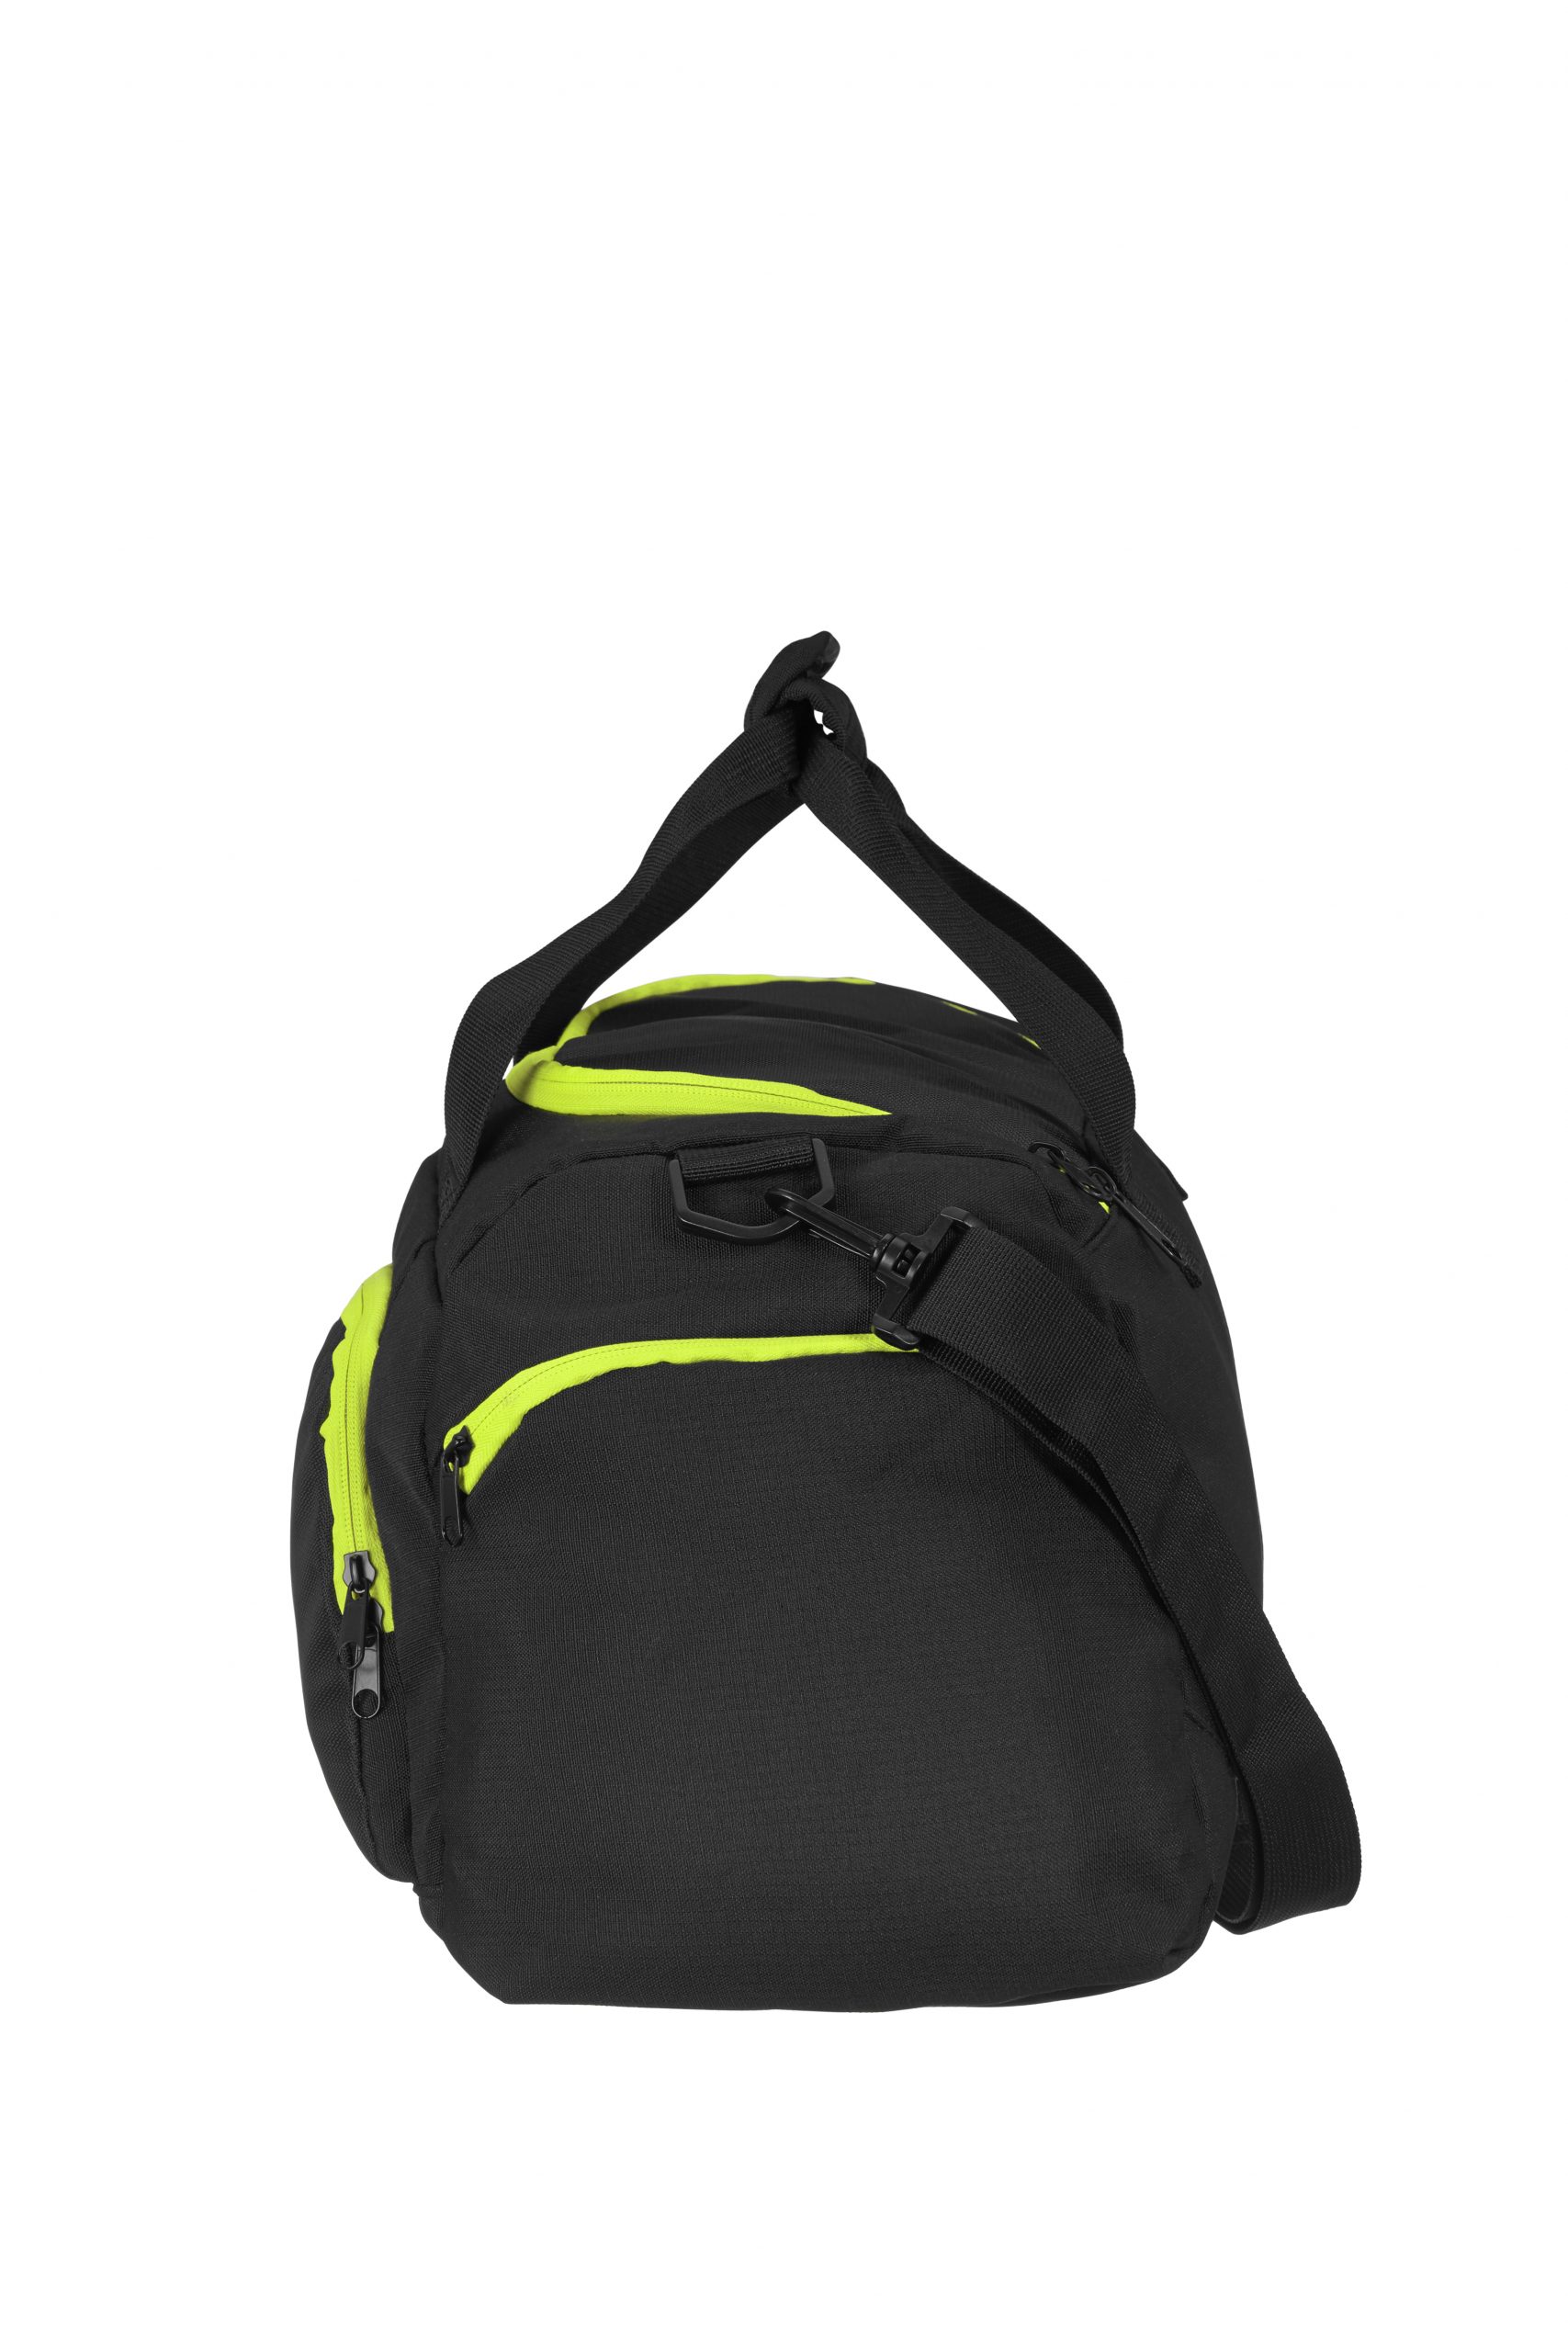 Grizzly Active Line Sportbag small musta/keltainen